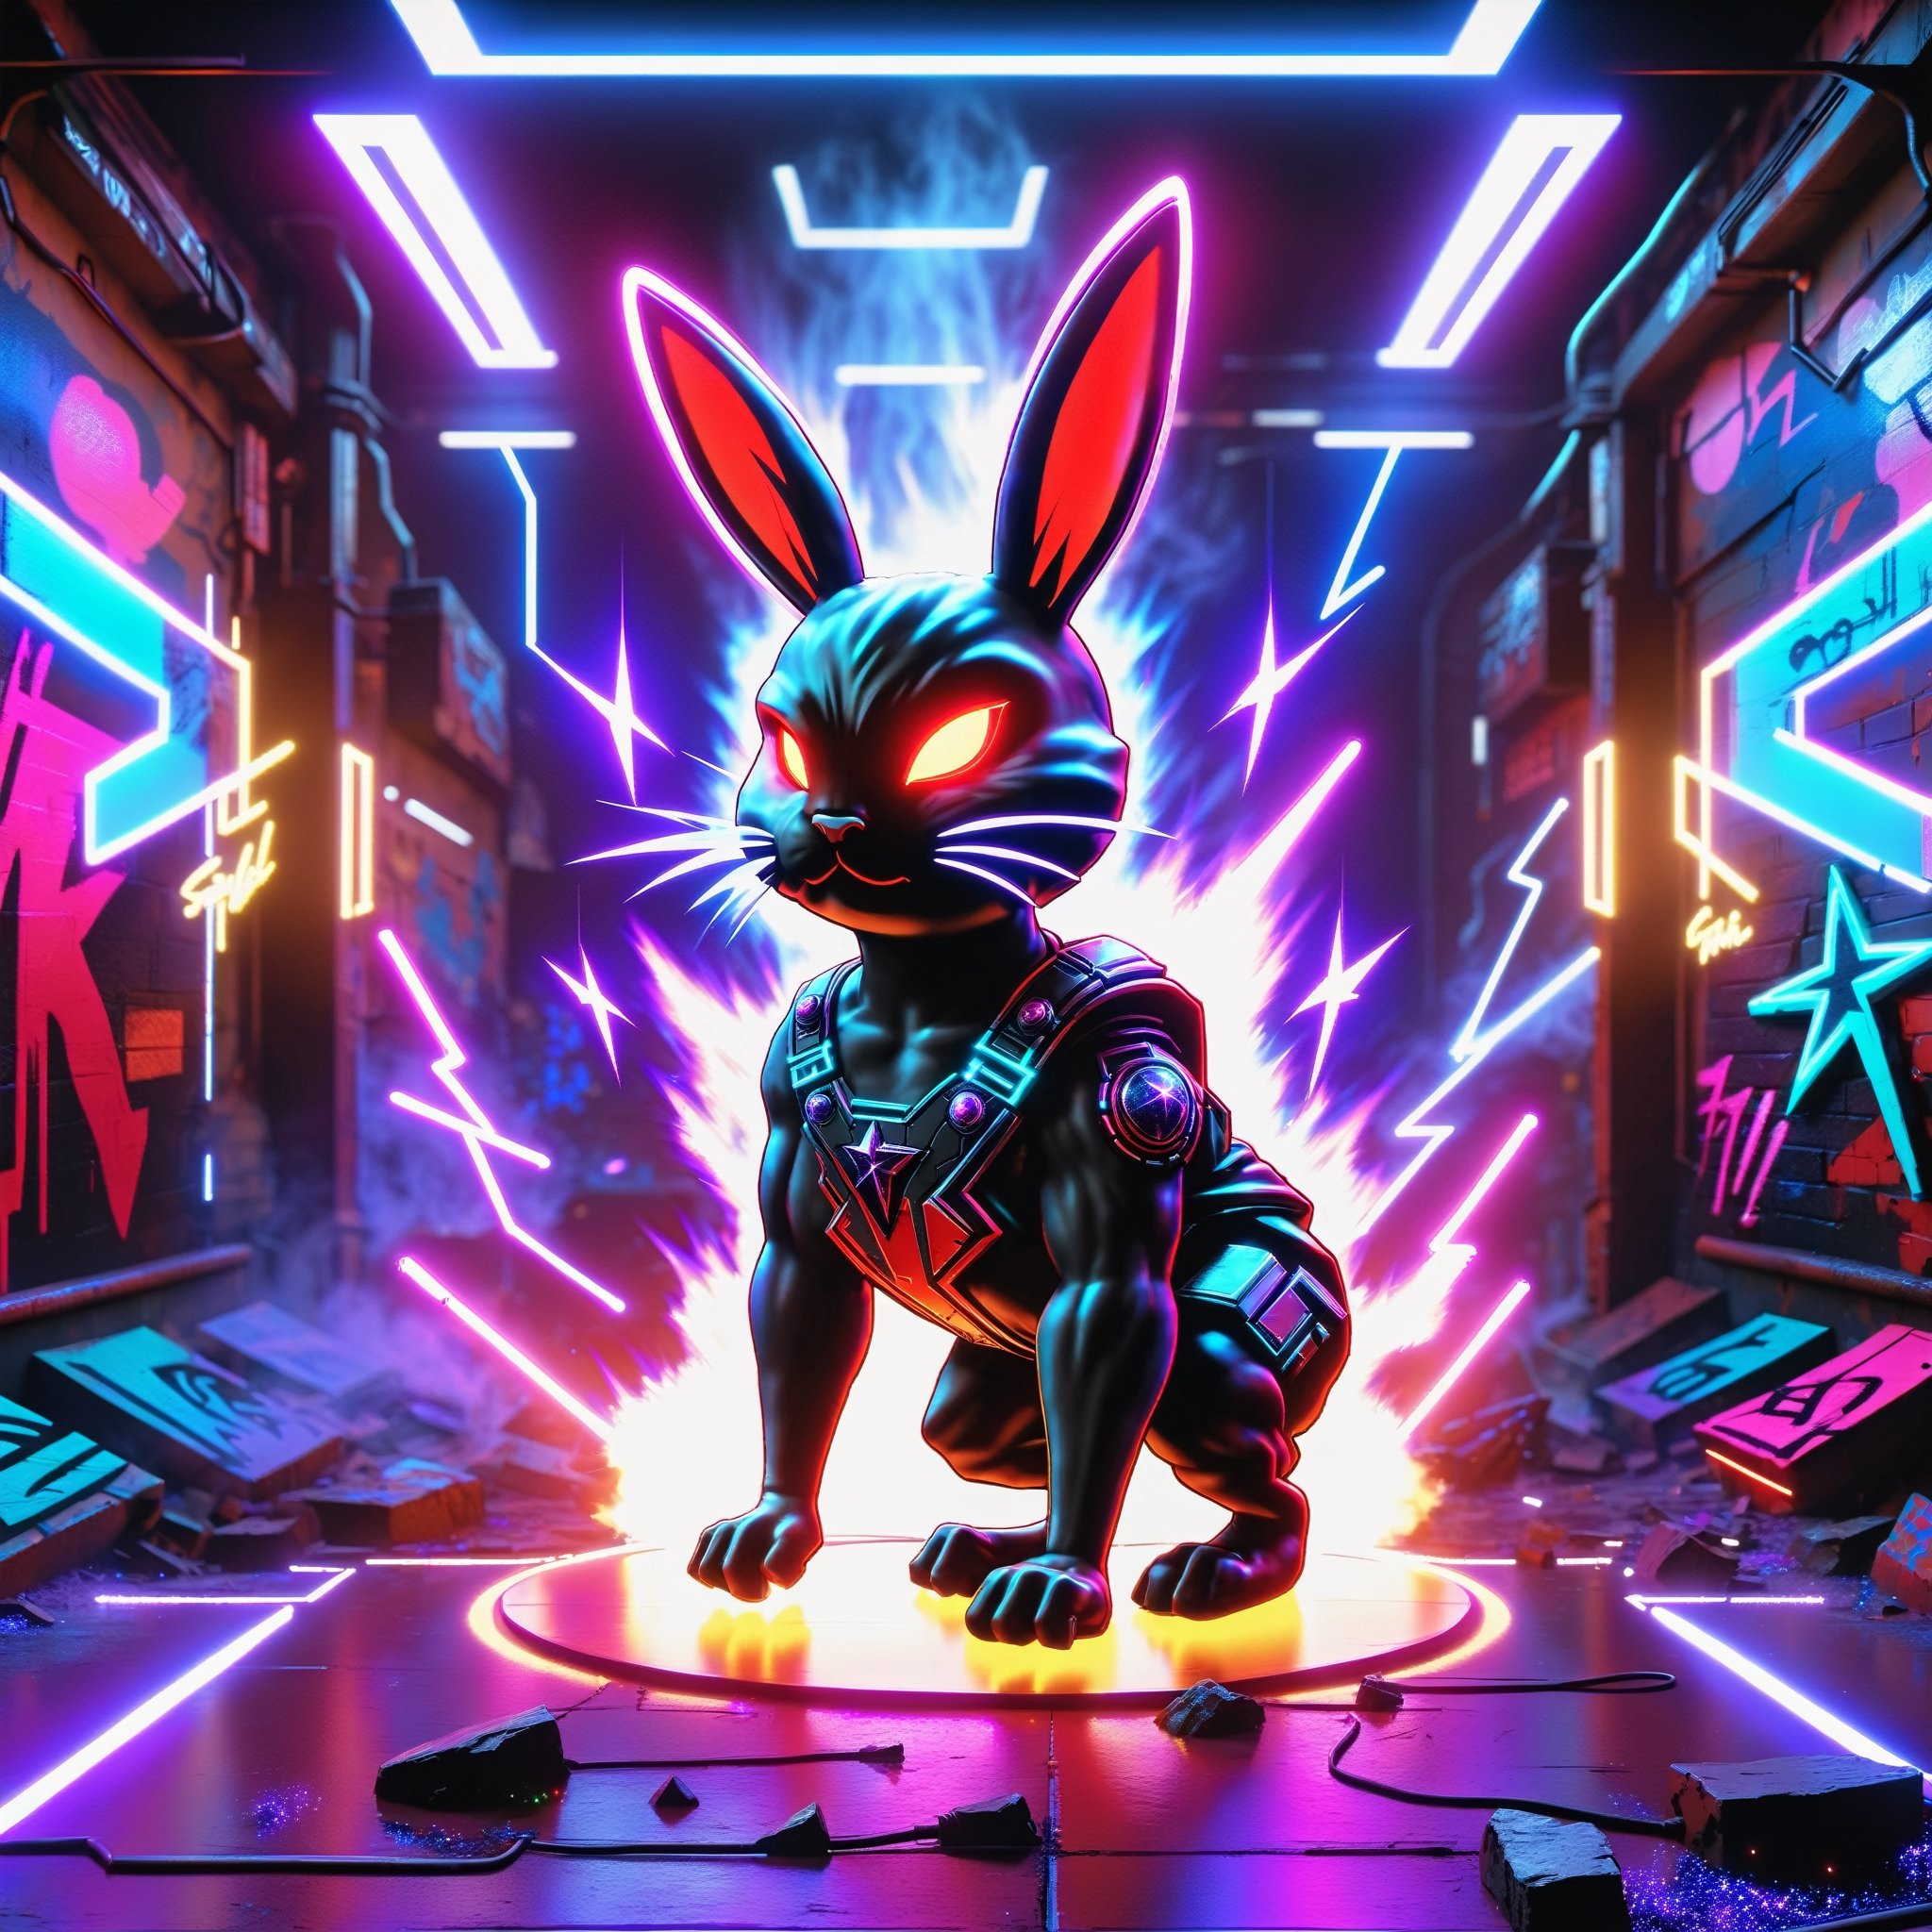 "Bad Bunny" in neon red, black, metallic, purple, blue, Pink, neon, sparkles, smoke, planet, graffiti background,
,composed of elements of thunder Electricity Space stars and neon lights, Cyberpunk,DonMH010D15pl4yXL 